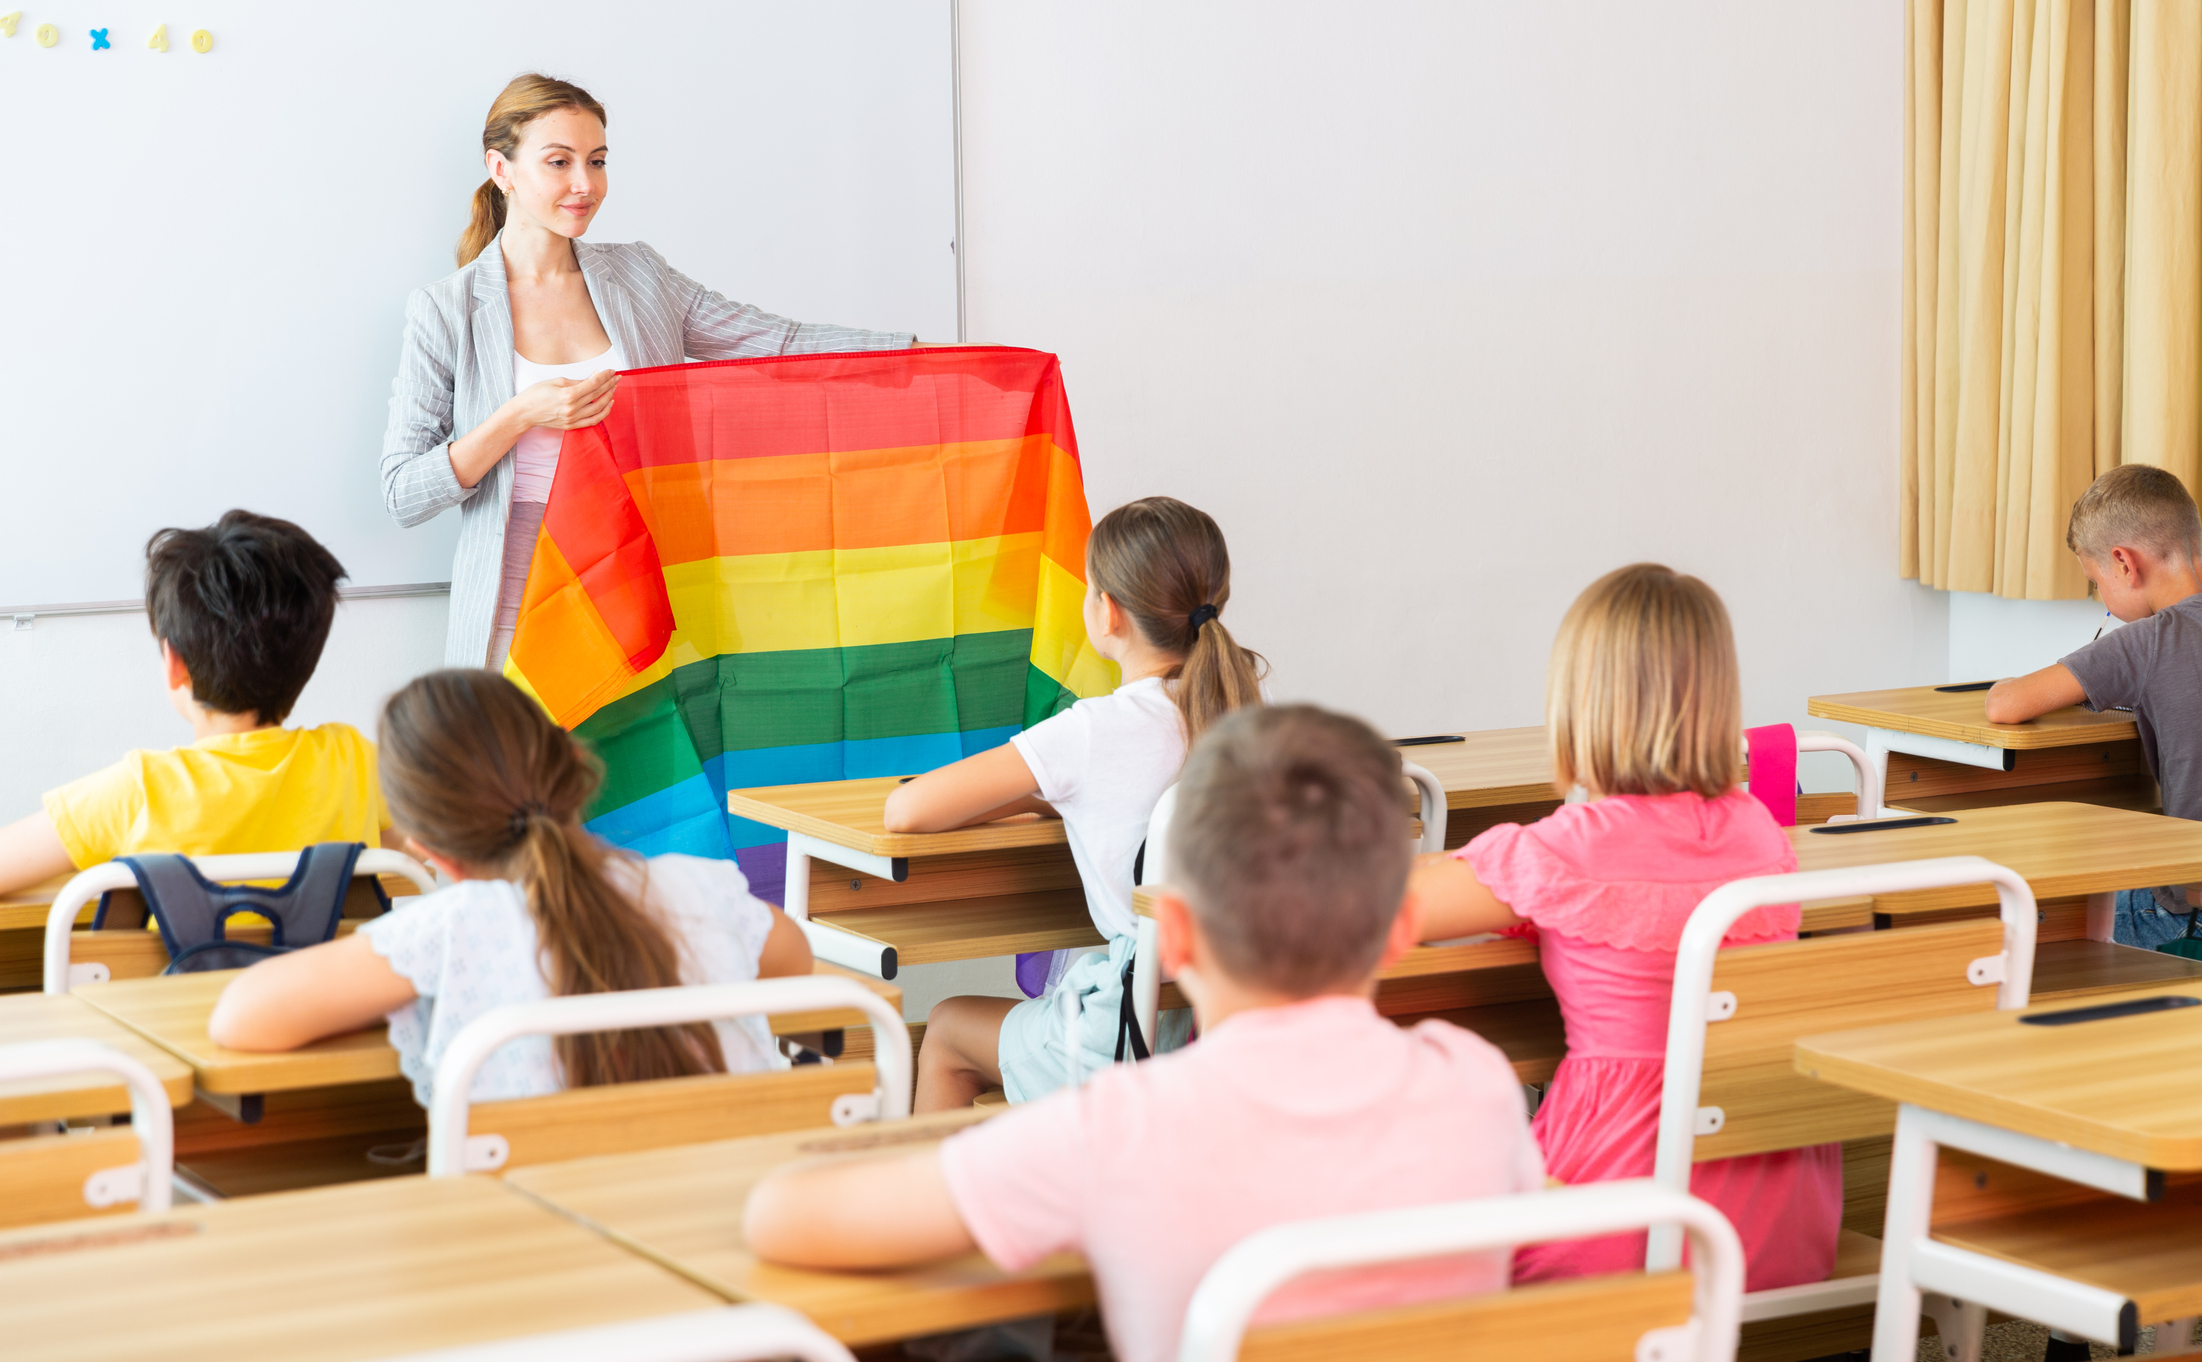 School probes students who refused to share bathrooms with opposite gender, citing ‘harassment’.